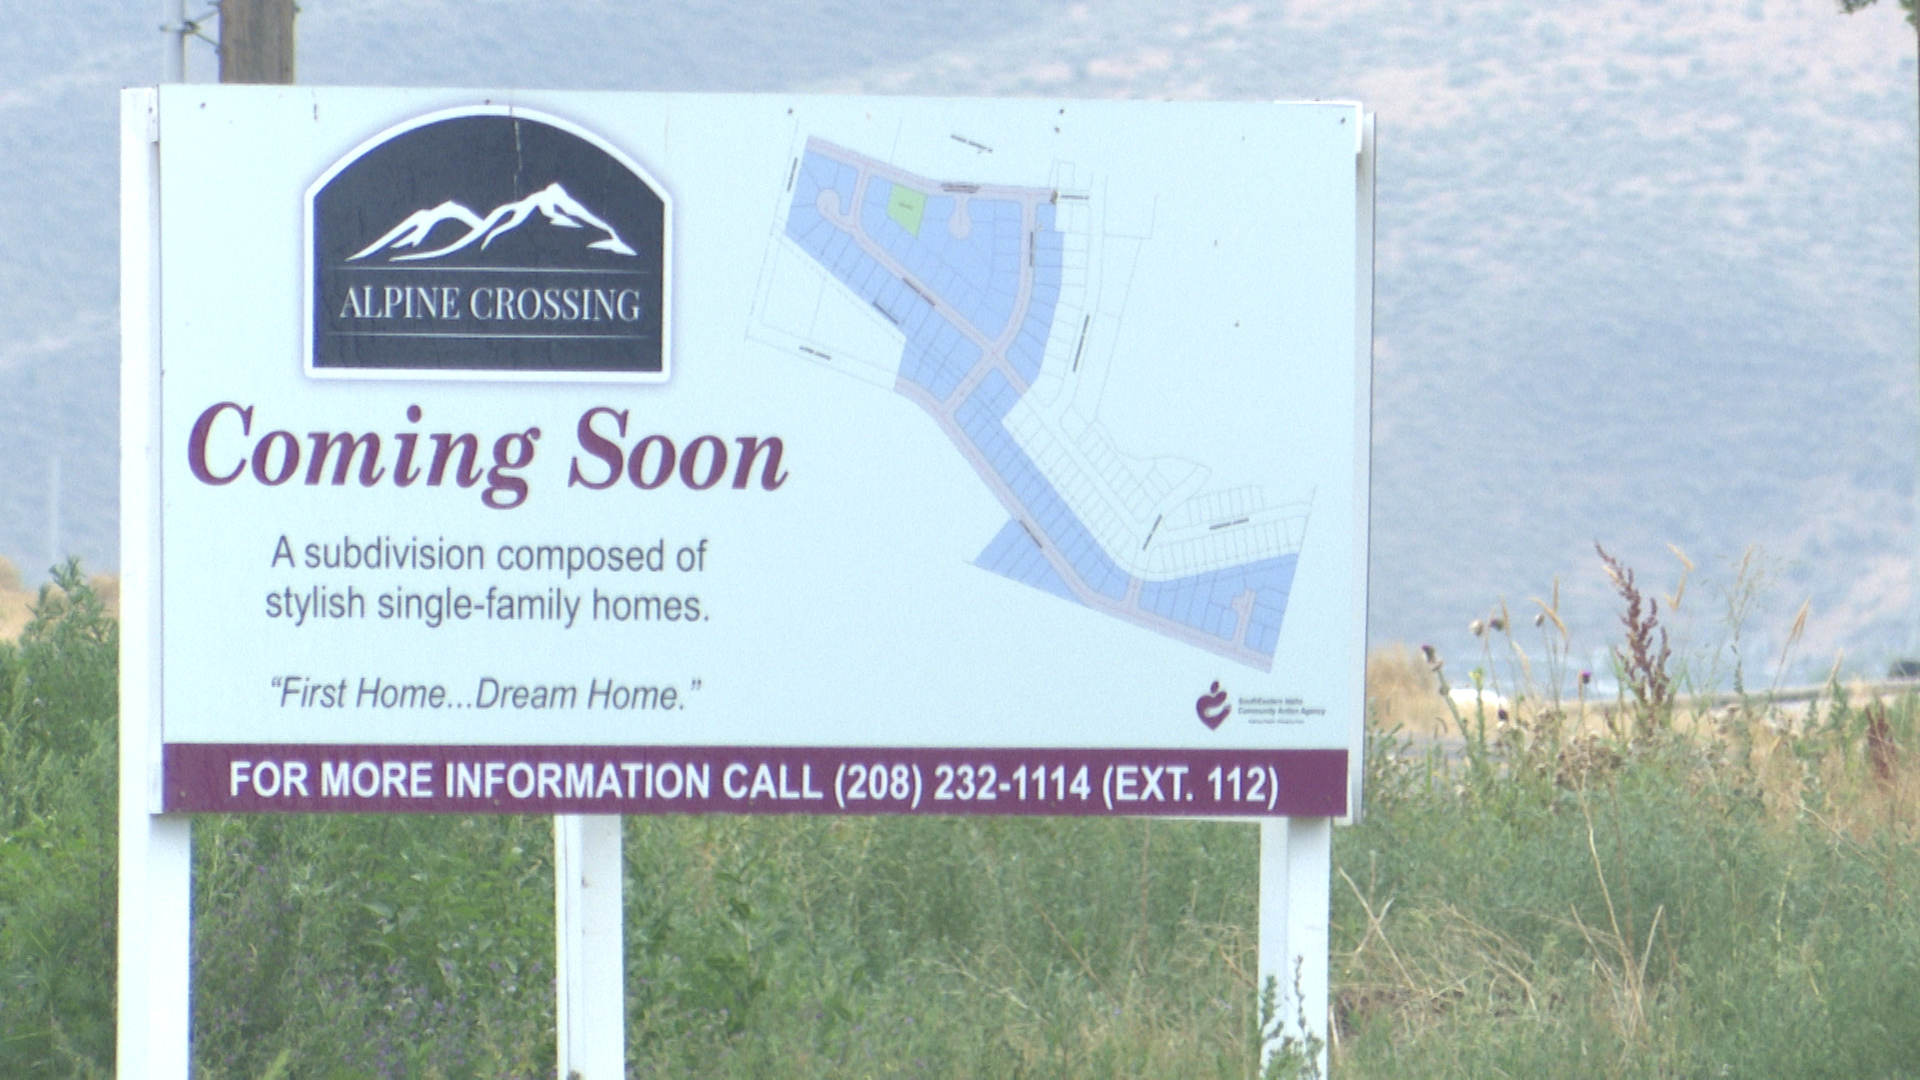 Affordable housing projects underway in Pocatello amidst tight market